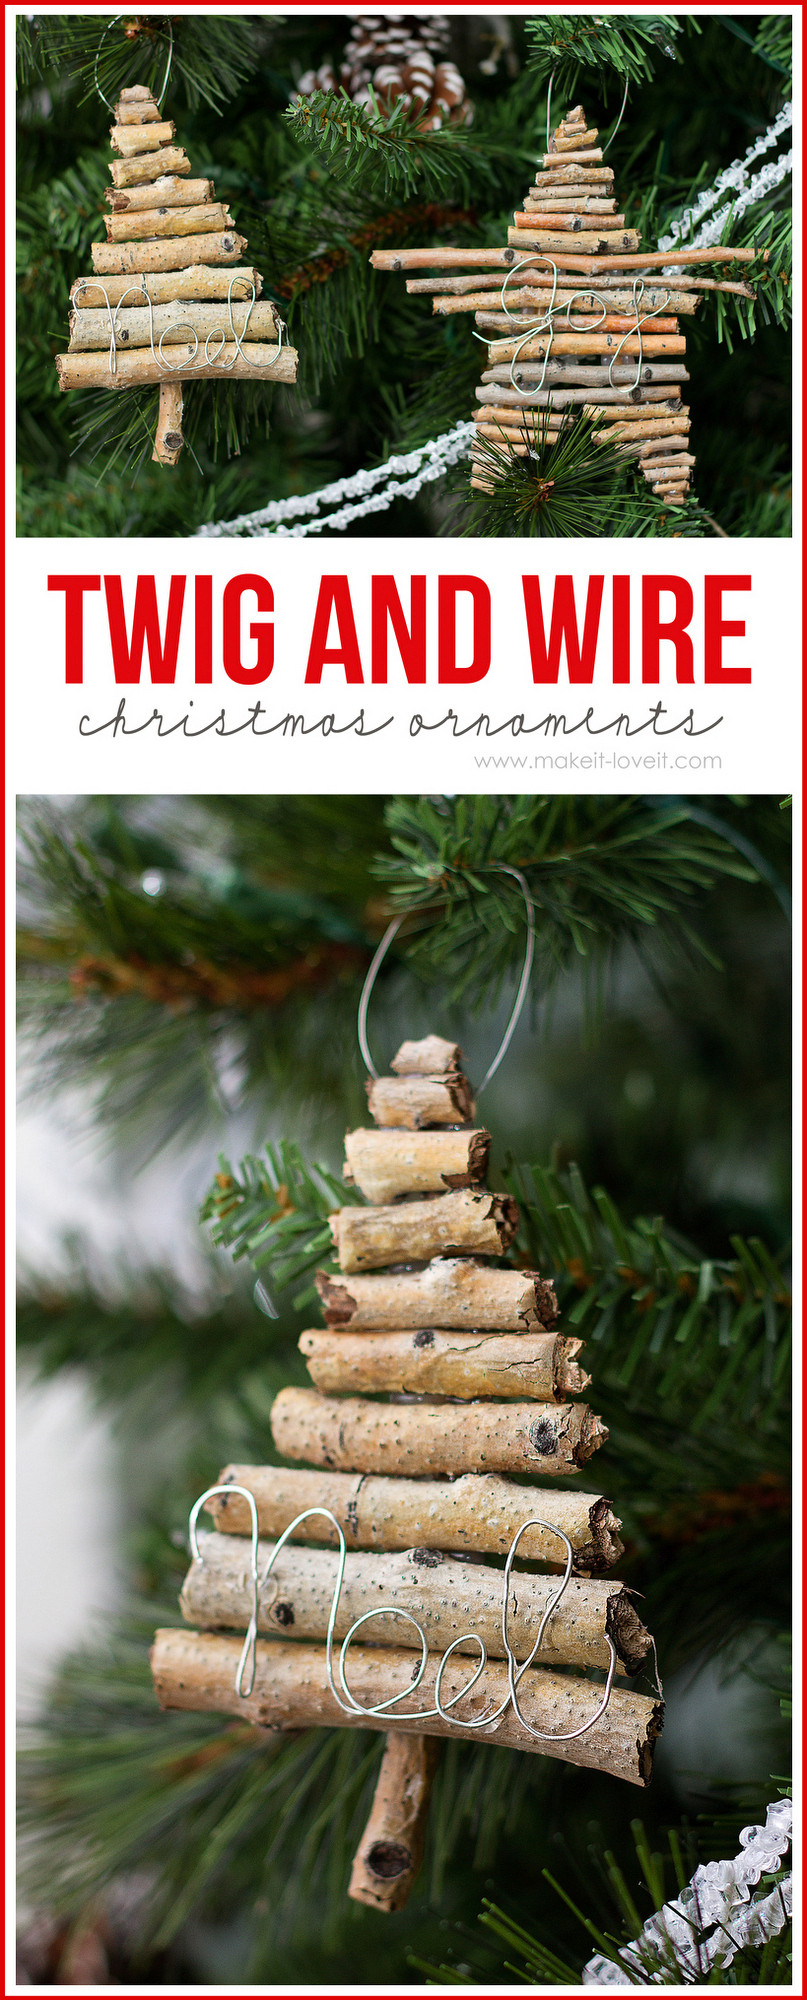 Christmas Ornaments DIY
 Twig and Wire Christmas Ornaments